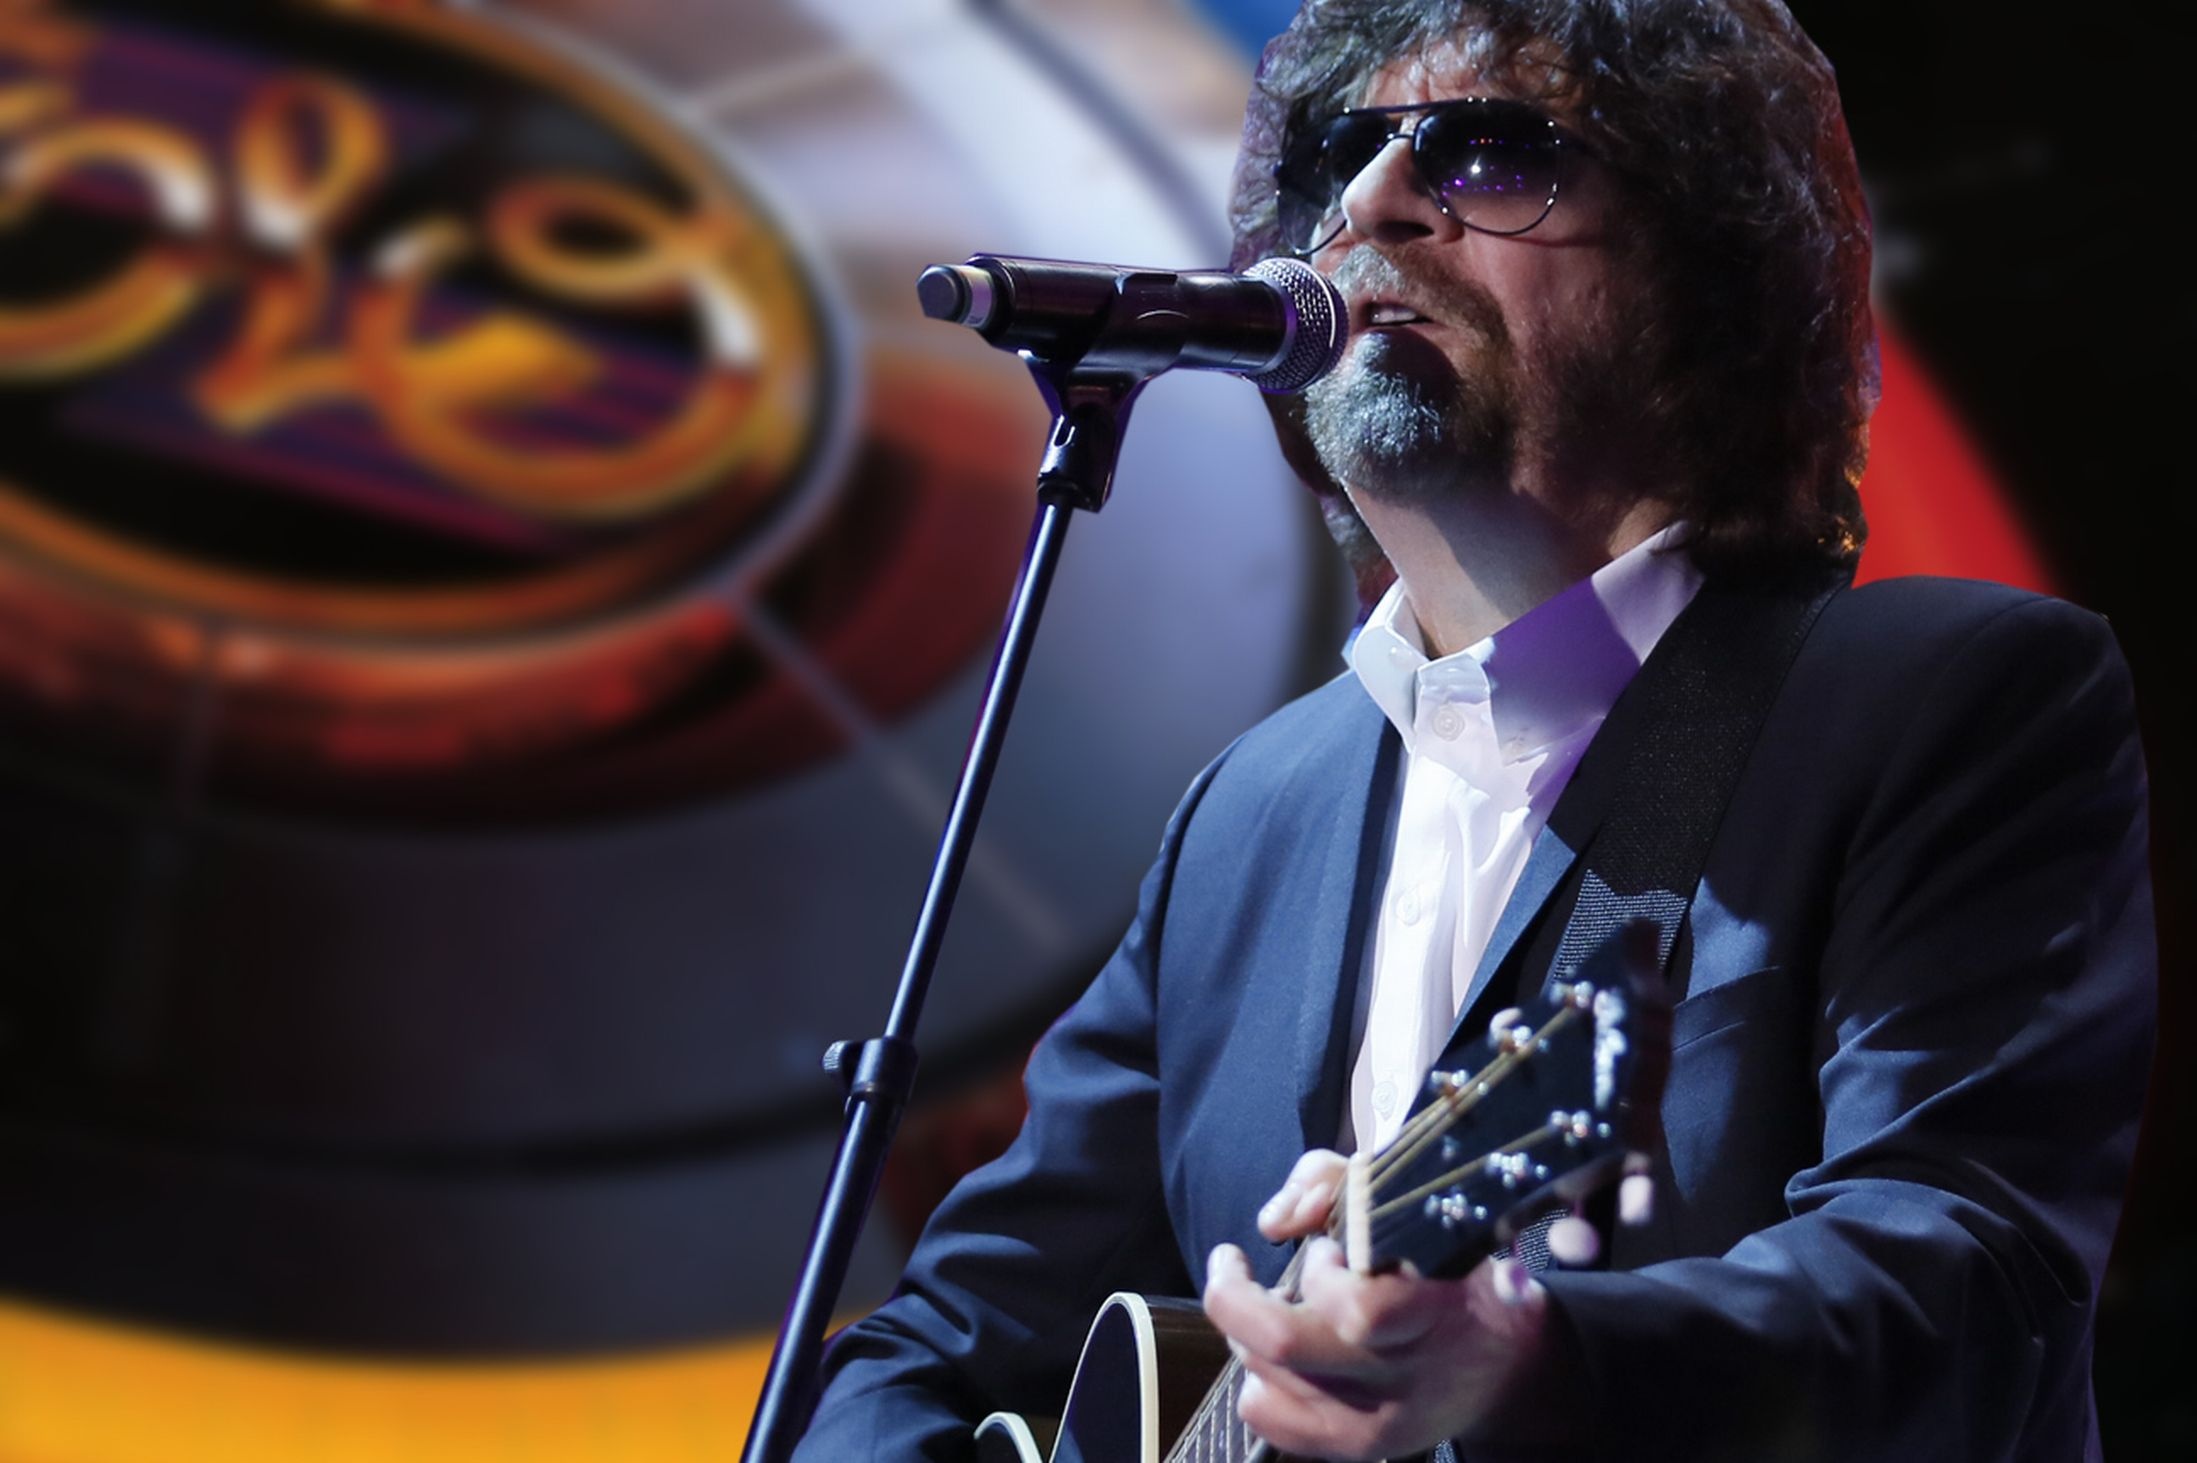 Jeff Lynne, Every Moment Has a Song, Jeff Lynne's musical journey, Songwriting process, 2200x1470 HD Desktop